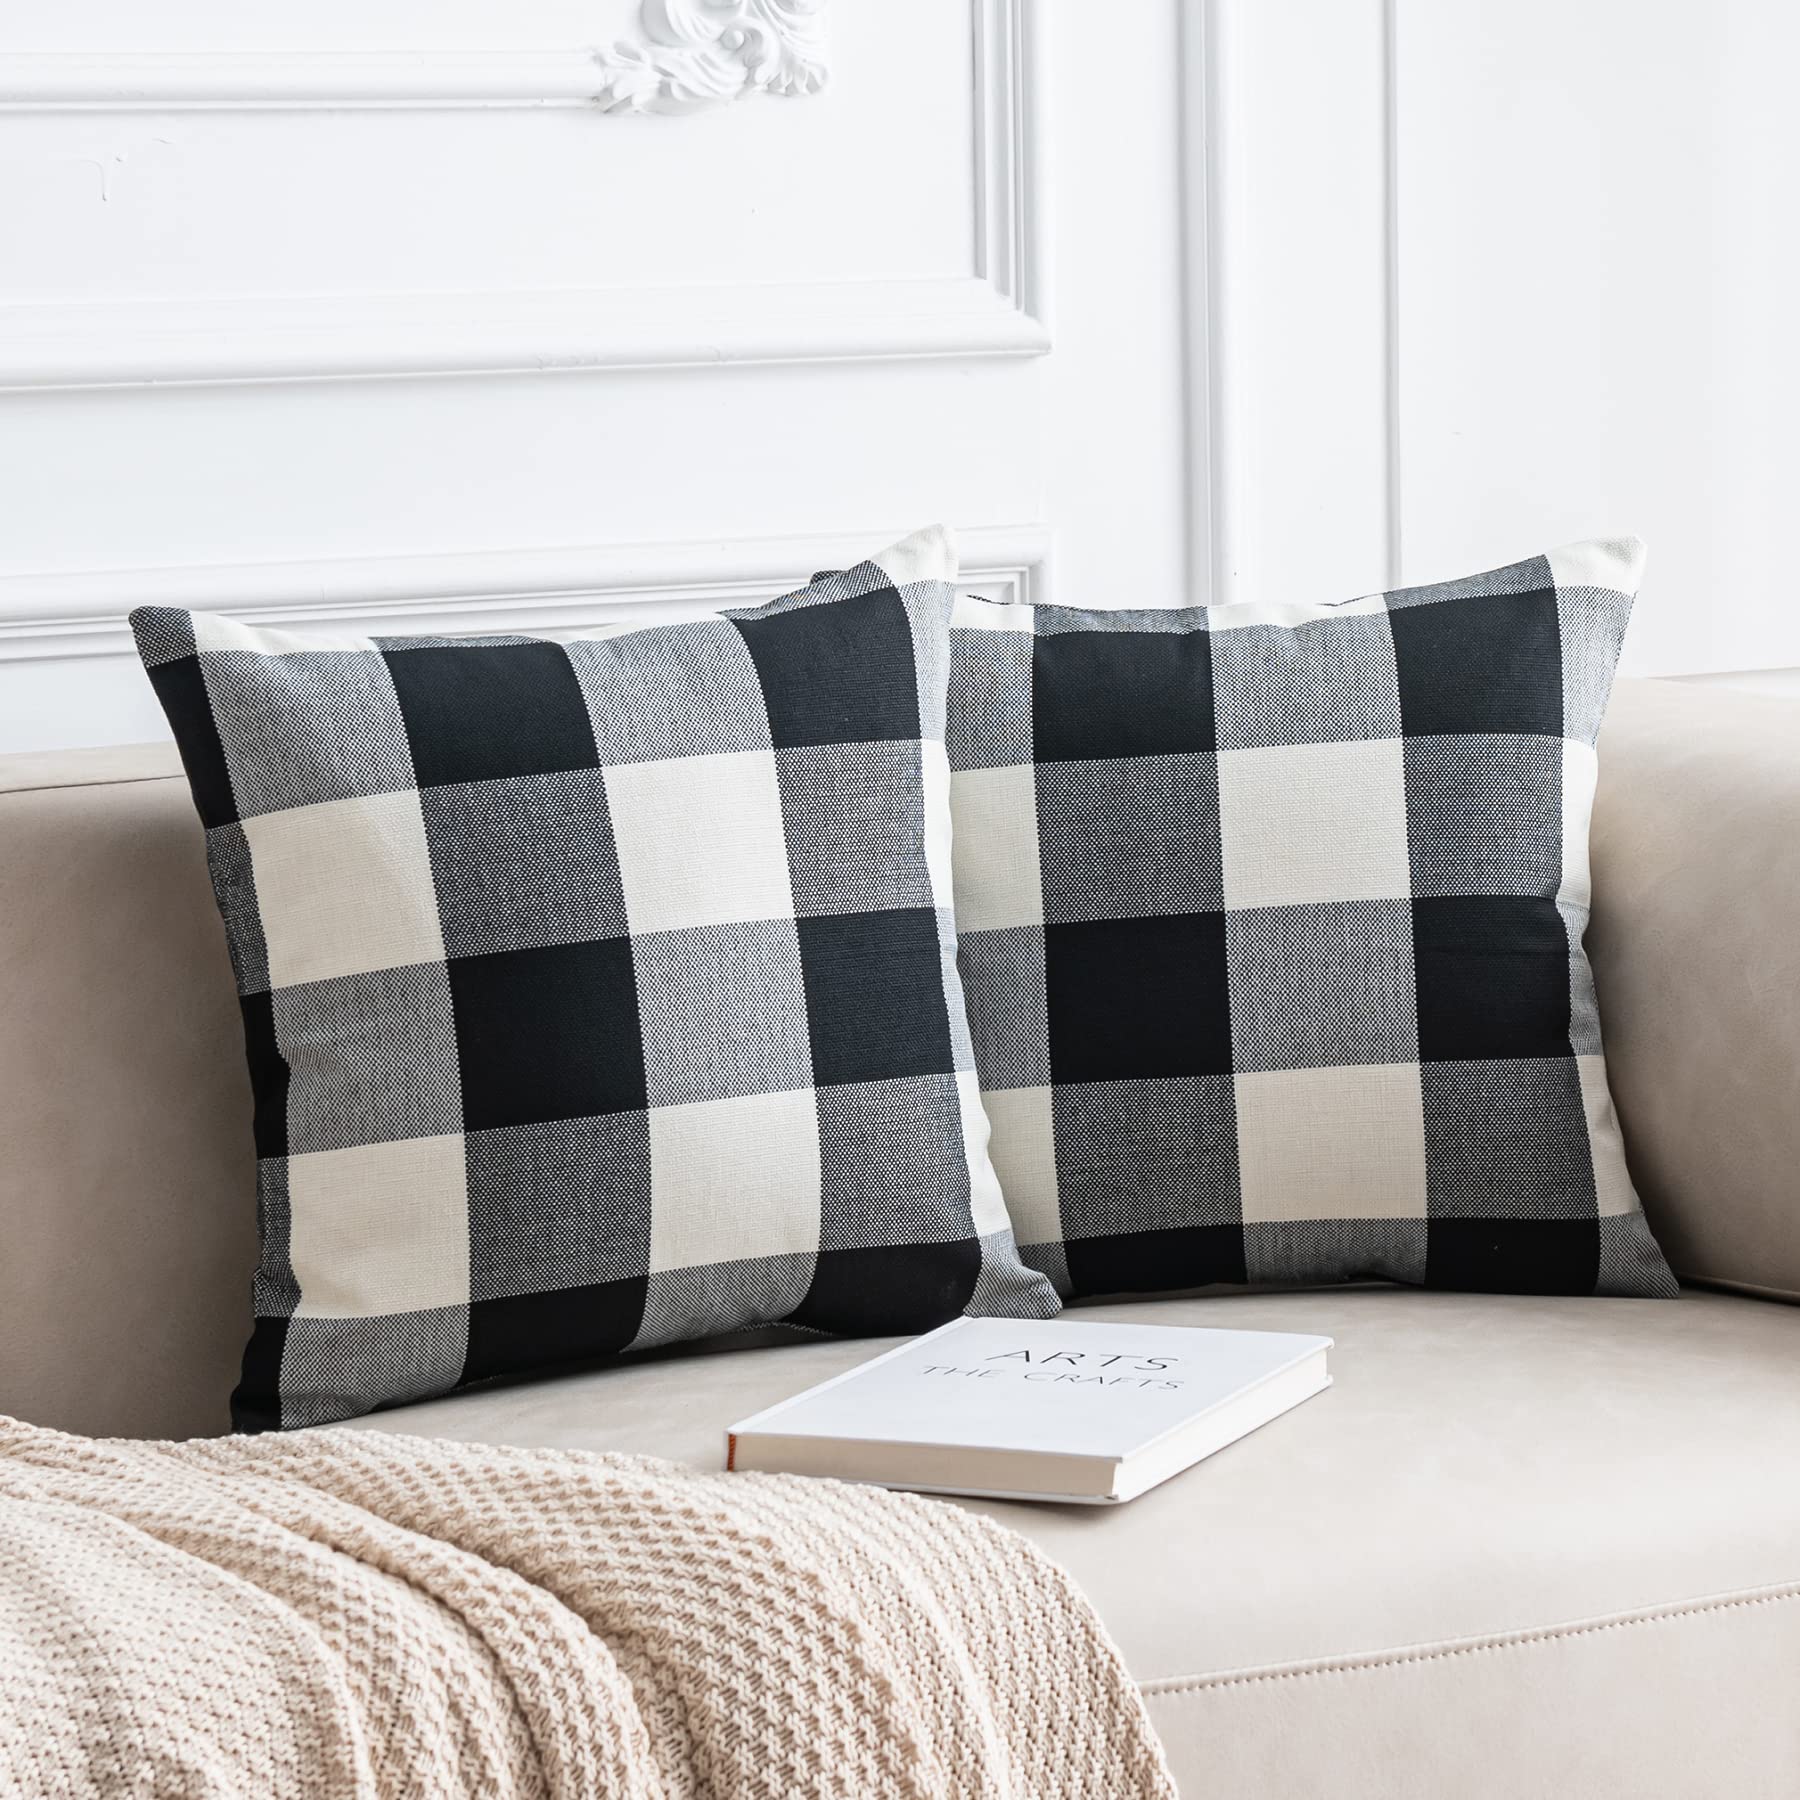 Book Cover Anickal Christmas Pillow Covers 18x18 Inch Set of 2 Black and White Buffalo Check Plaid Throw Pillow Covers Rustic Farmhouse Decorative Cushion Case for Home Sofa Couch Decor Black and White 18 x 18-Inch